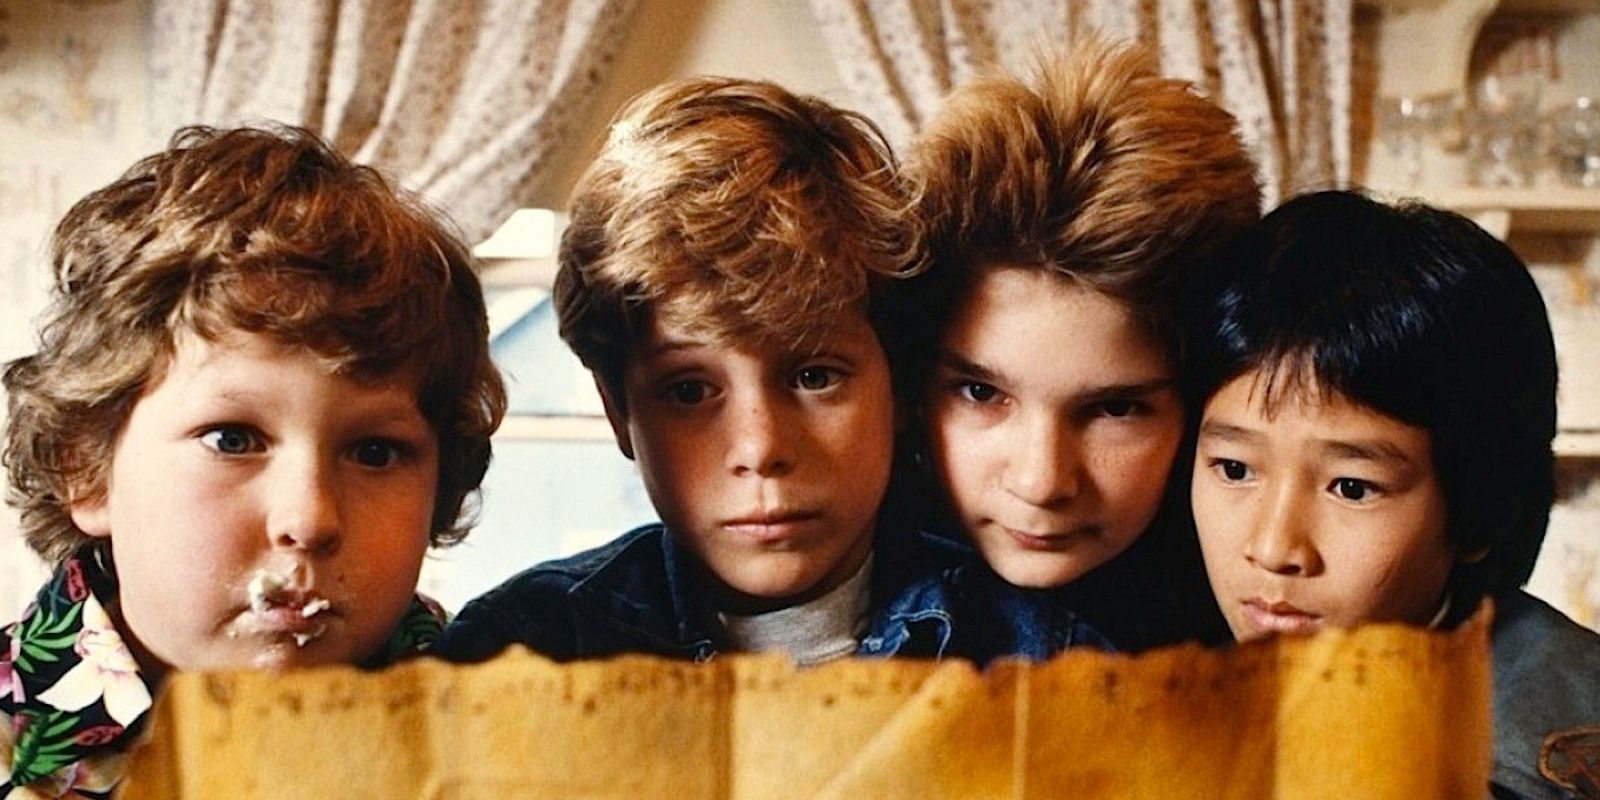 The cast from The Goonies looking at a map